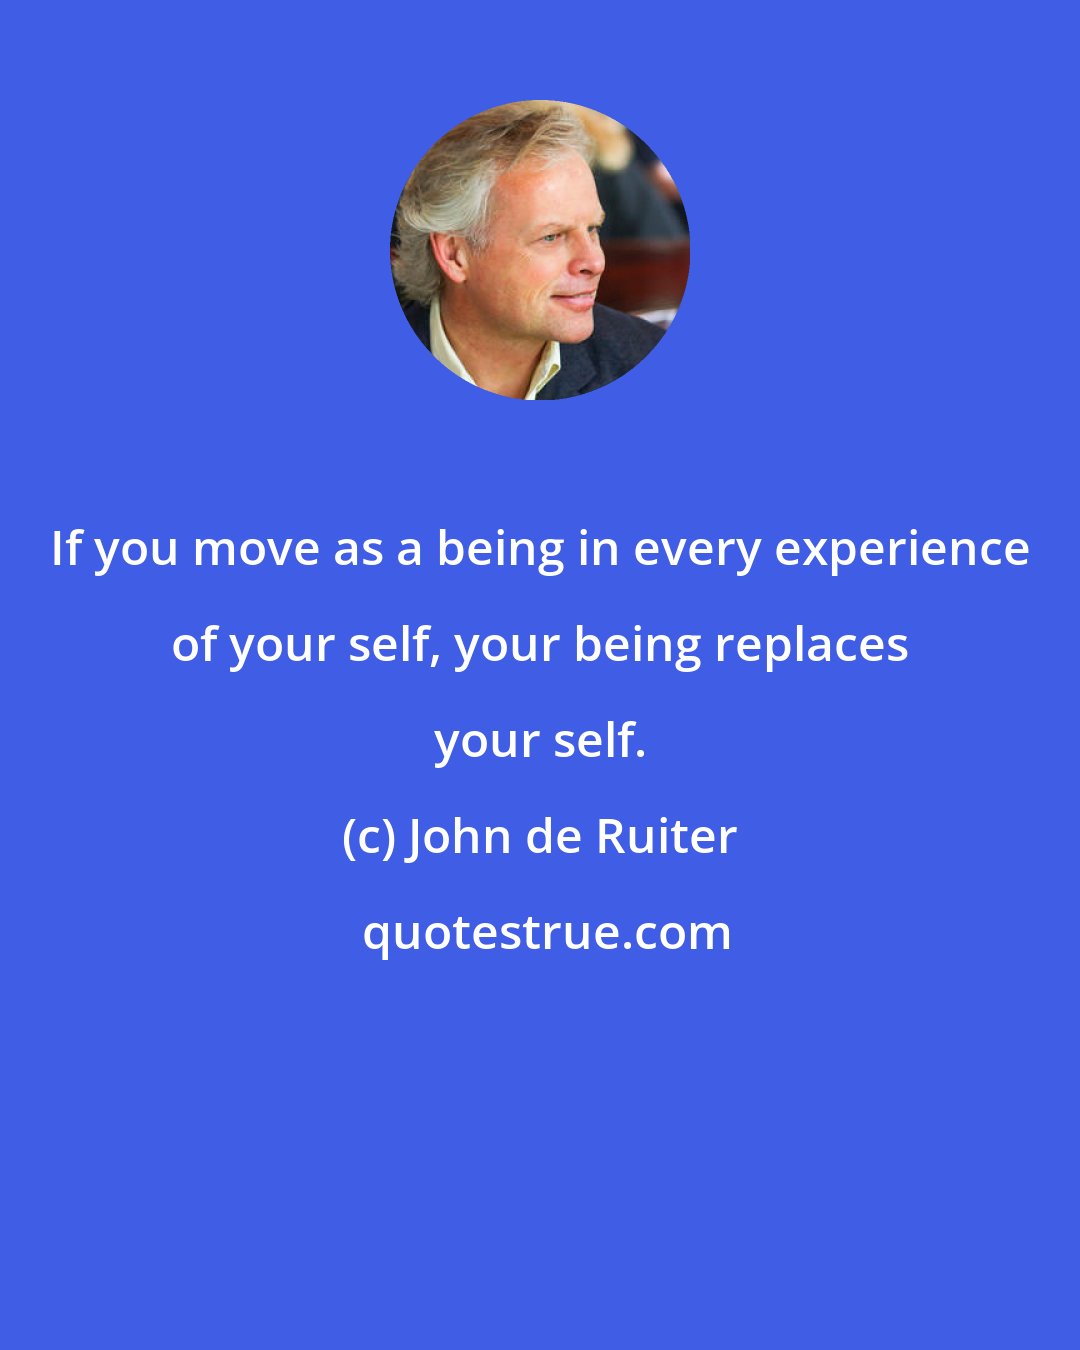 John de Ruiter: If you move as a being in every experience of your self, your being replaces your self.